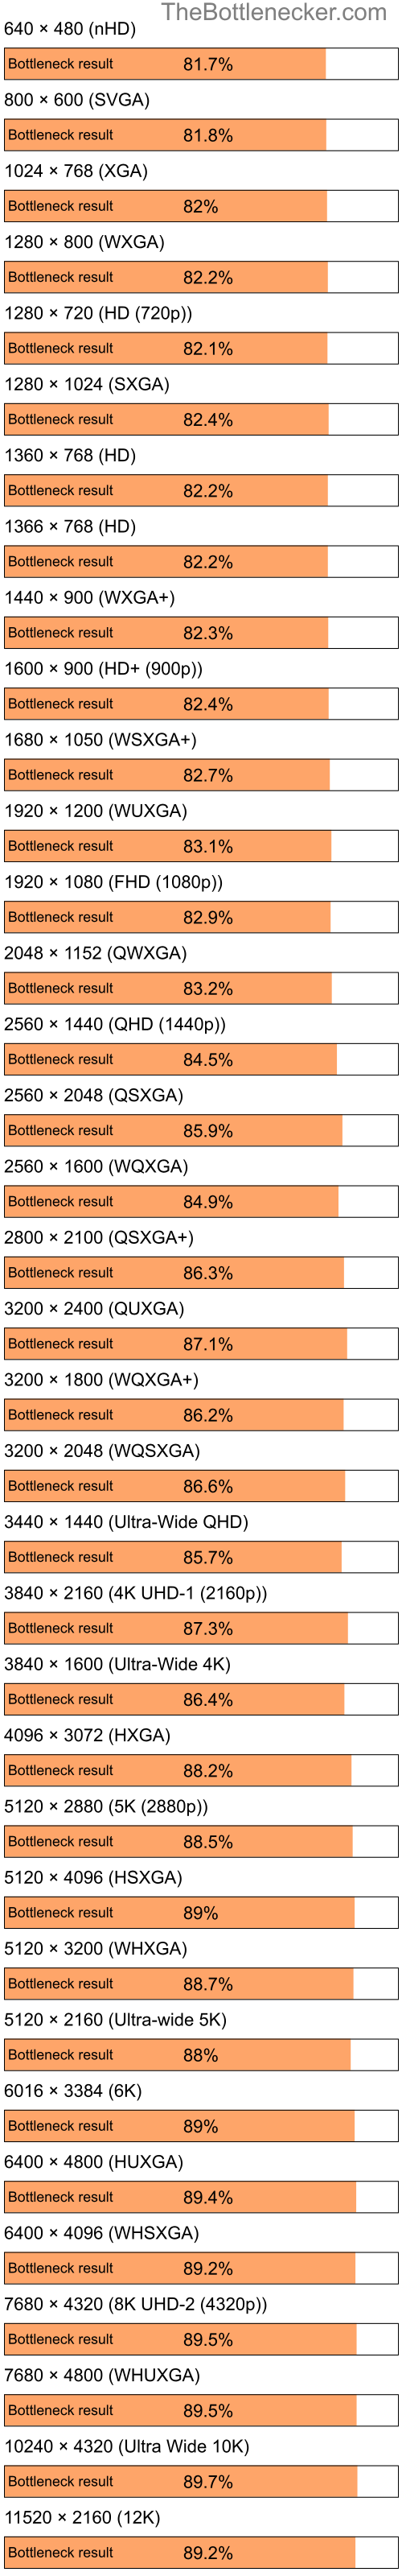 Bottleneck results by resolution for Intel Celeron and AMD Radeon 9600SE in Graphic Card Intense Tasks